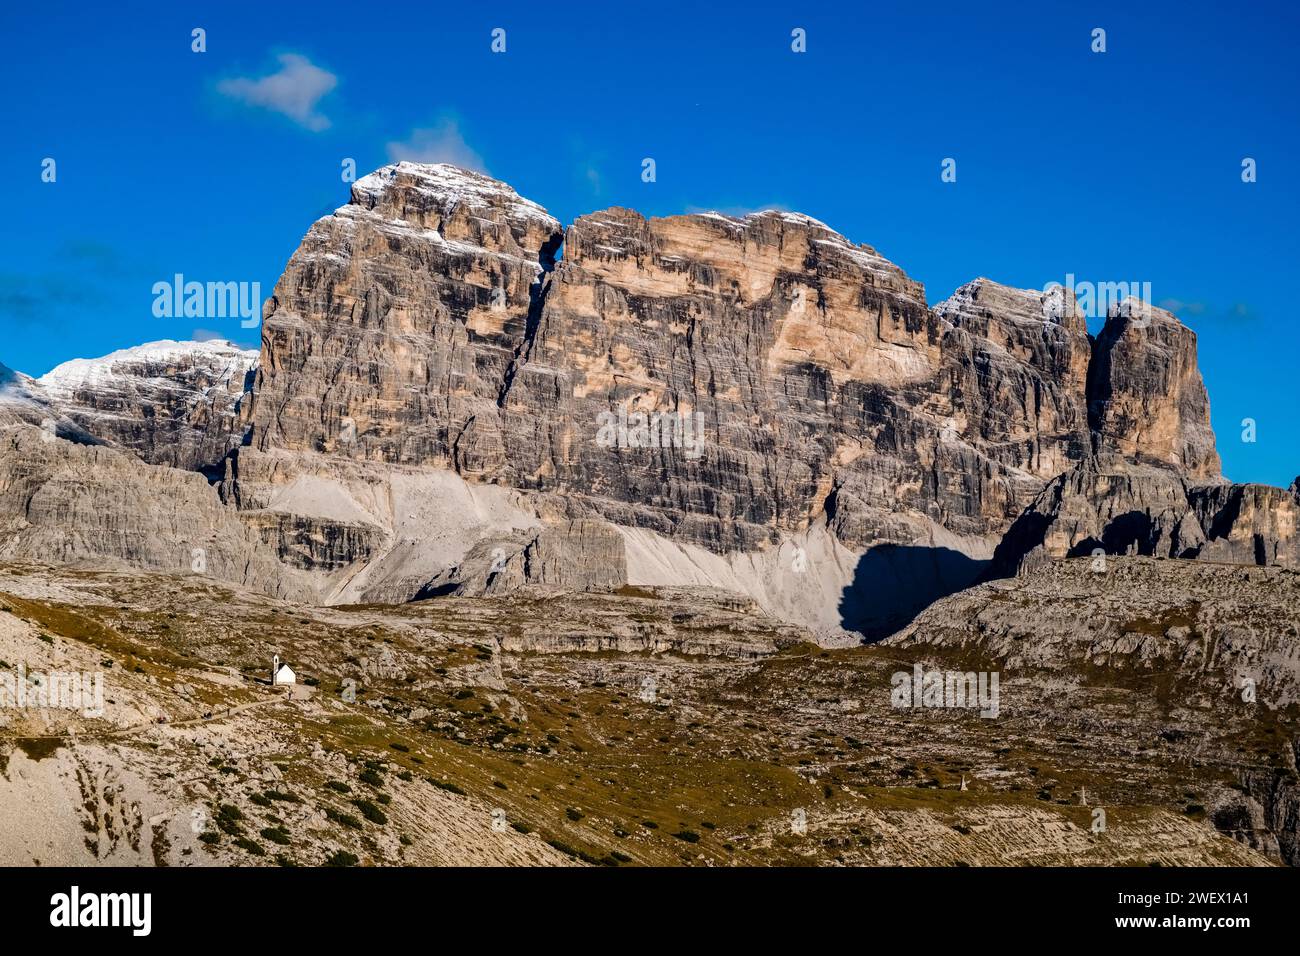 The rocky summits of the rock formation Croda dei Toni in Tre Cime National Park, partially covered in fresh snow in autumn. Stock Photo